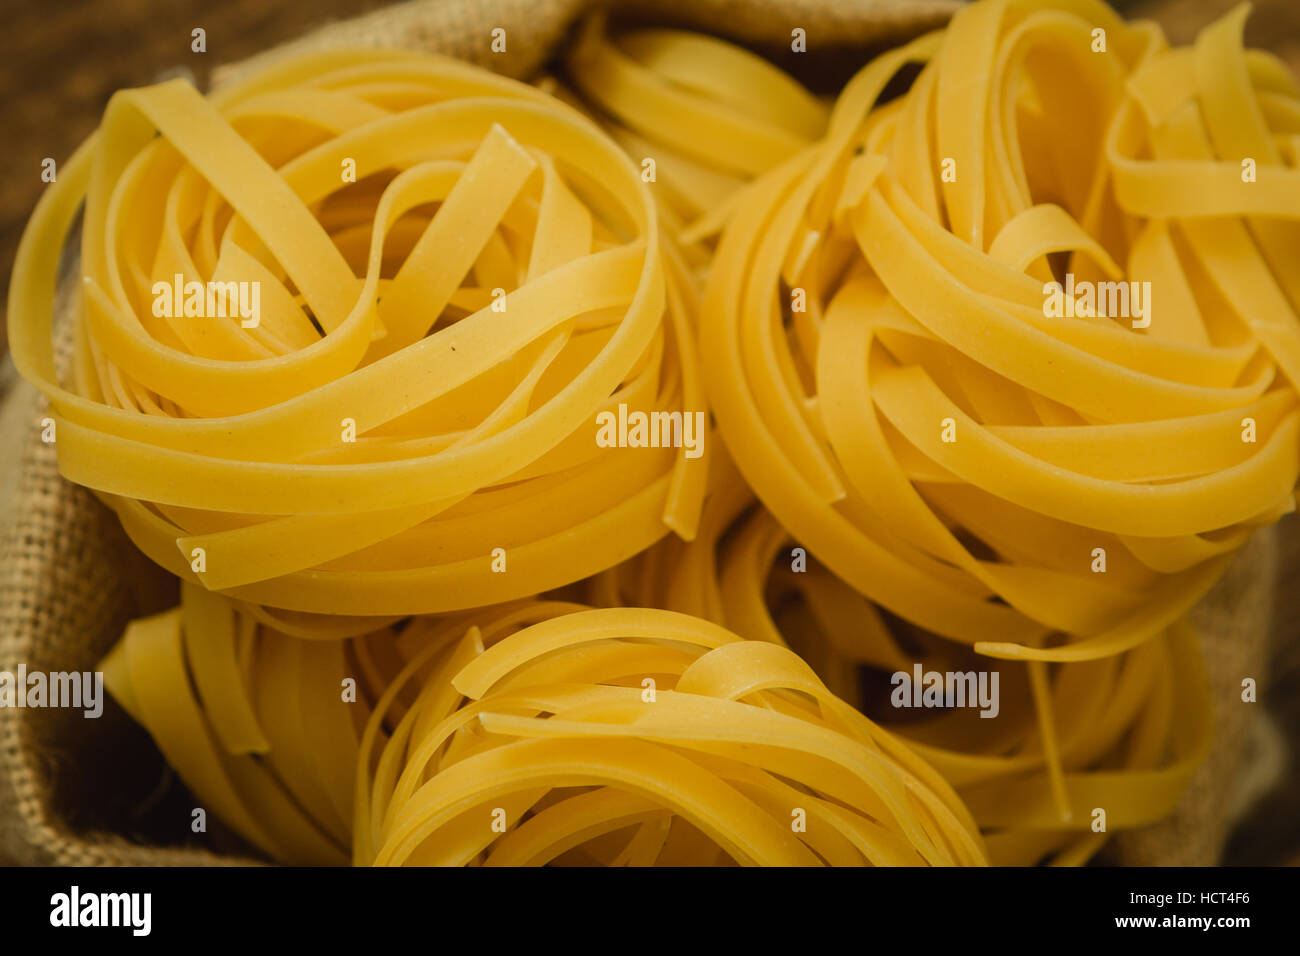 https://c8.alamy.com/comp/HCT4F6/different-types-of-colored-pasta-with-various-shapes-HCT4F6.jpg